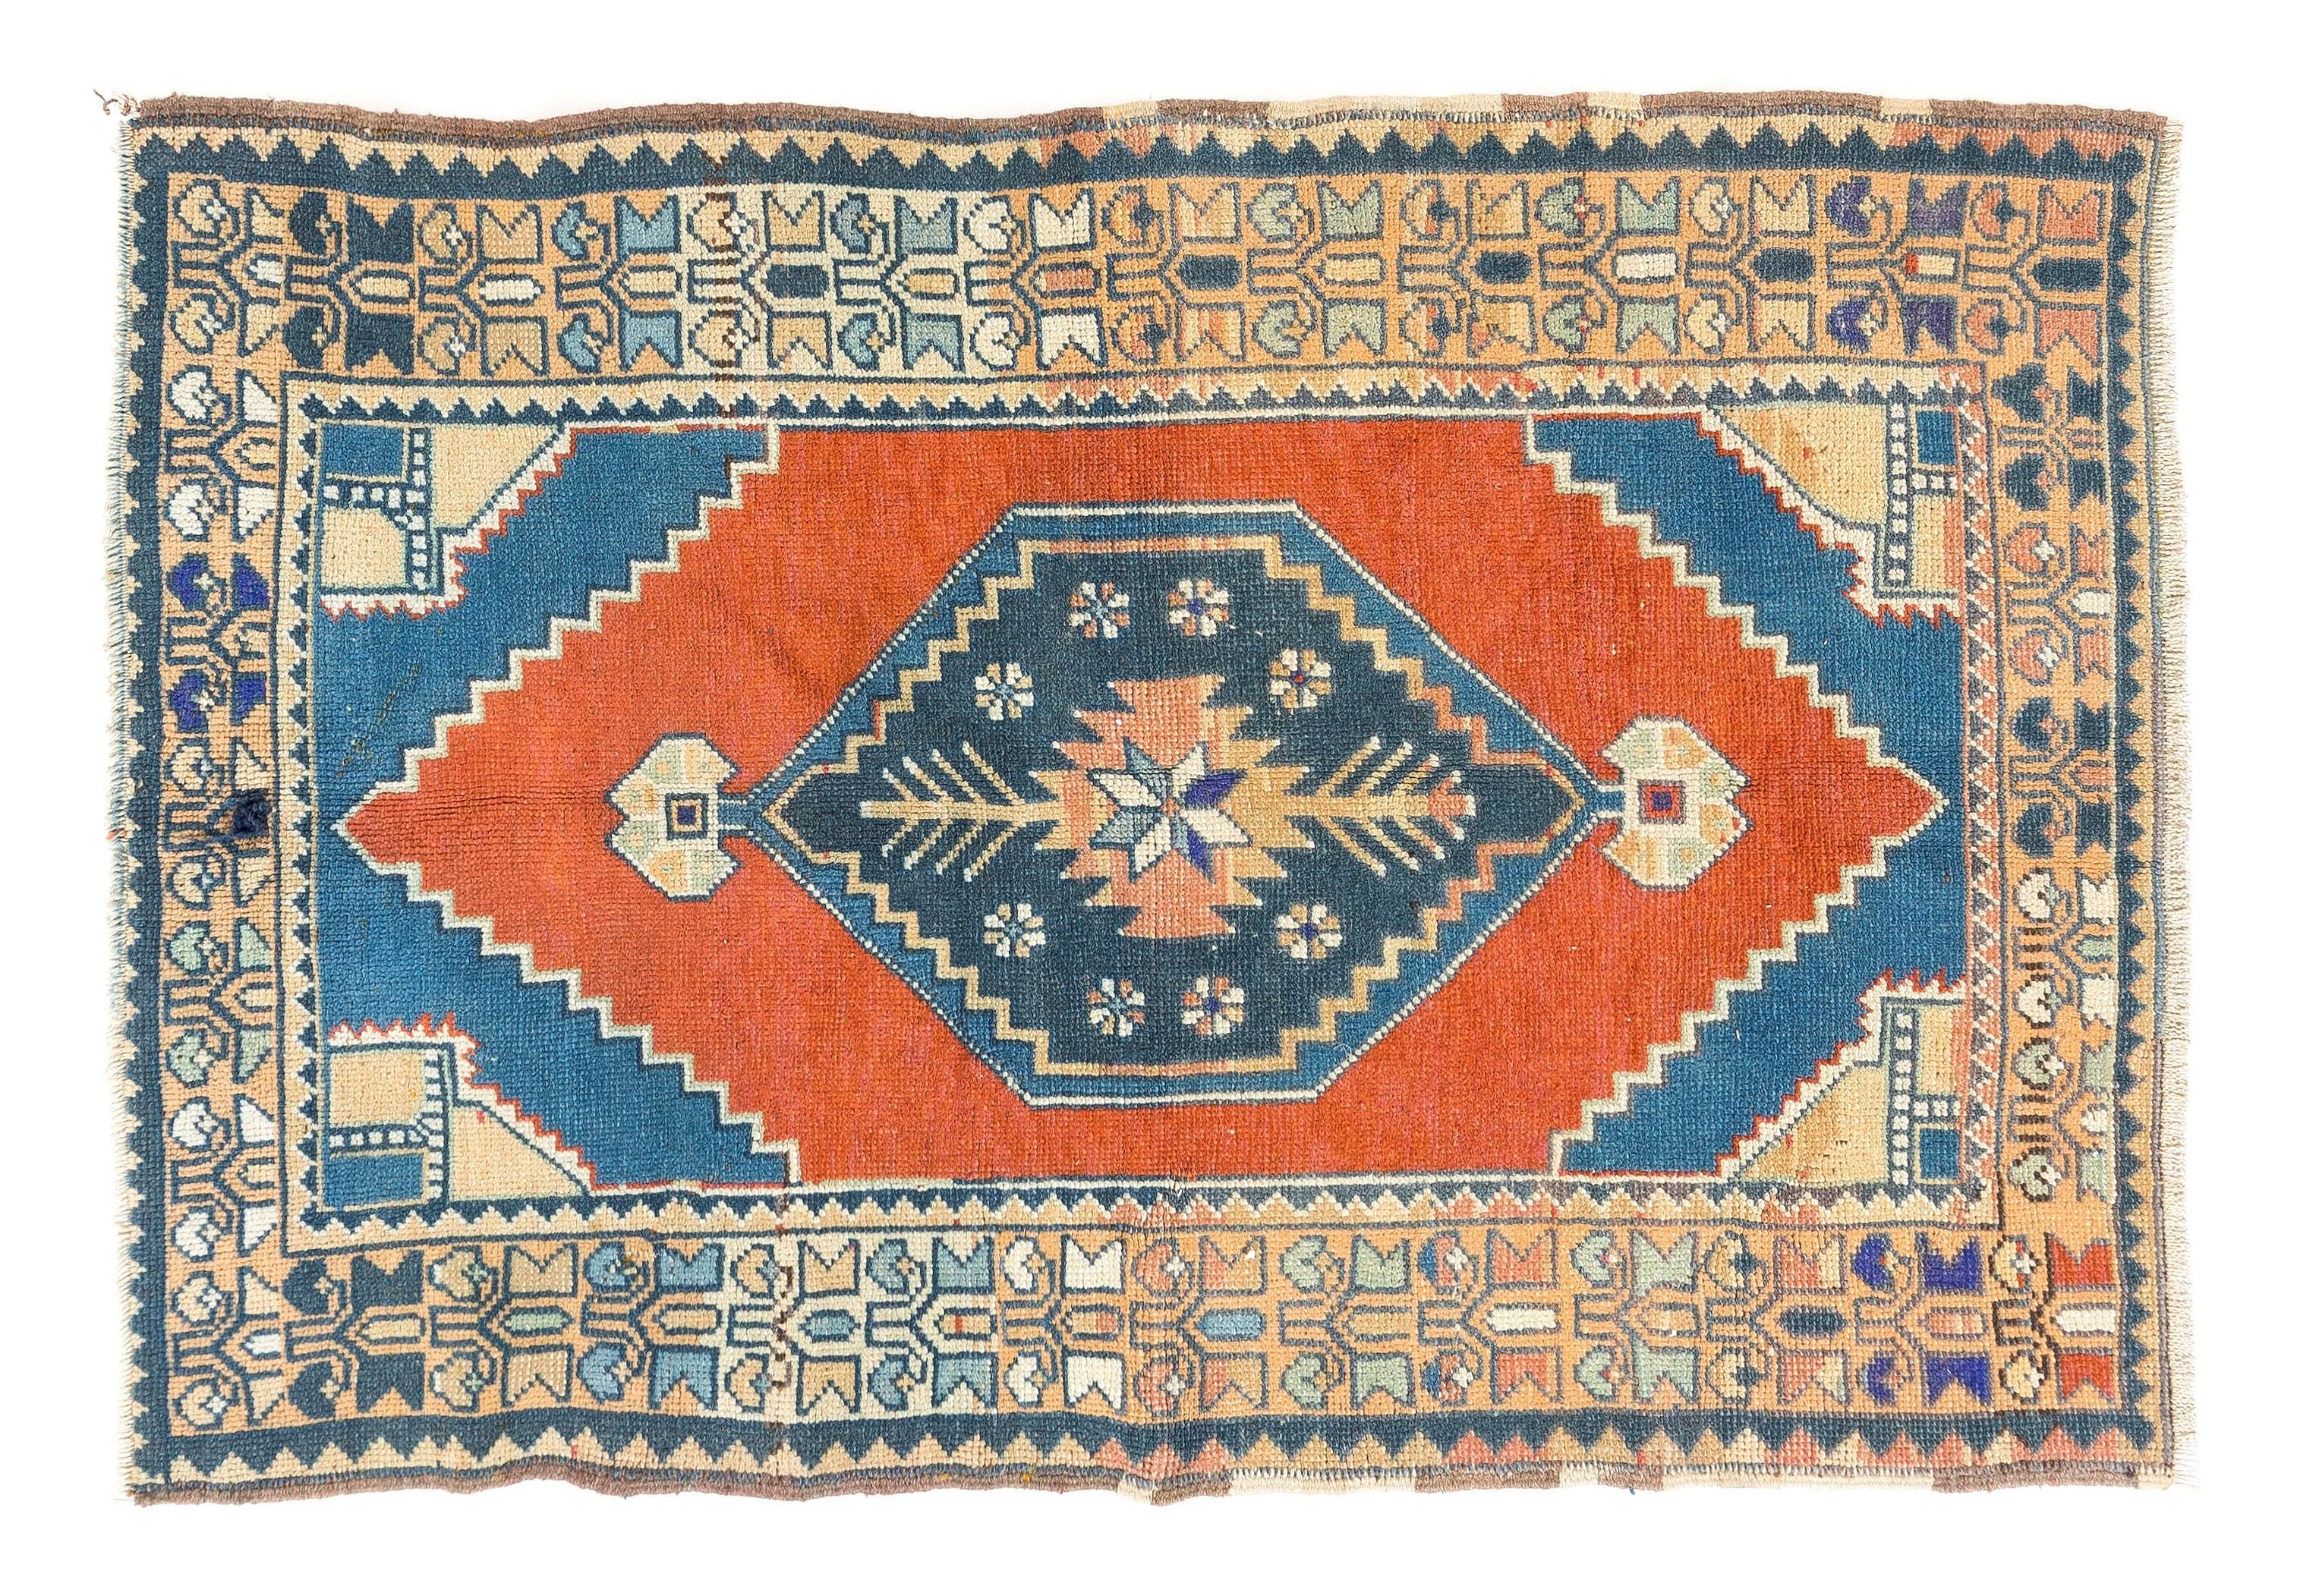 A vintage central Anatolian rug with a bold geometric design, made of medium wool pile on a tightly woven wool foundation and all natural dyes. The rug is sturdy and in very good condition.
It has been washed professionally and ready to be used in